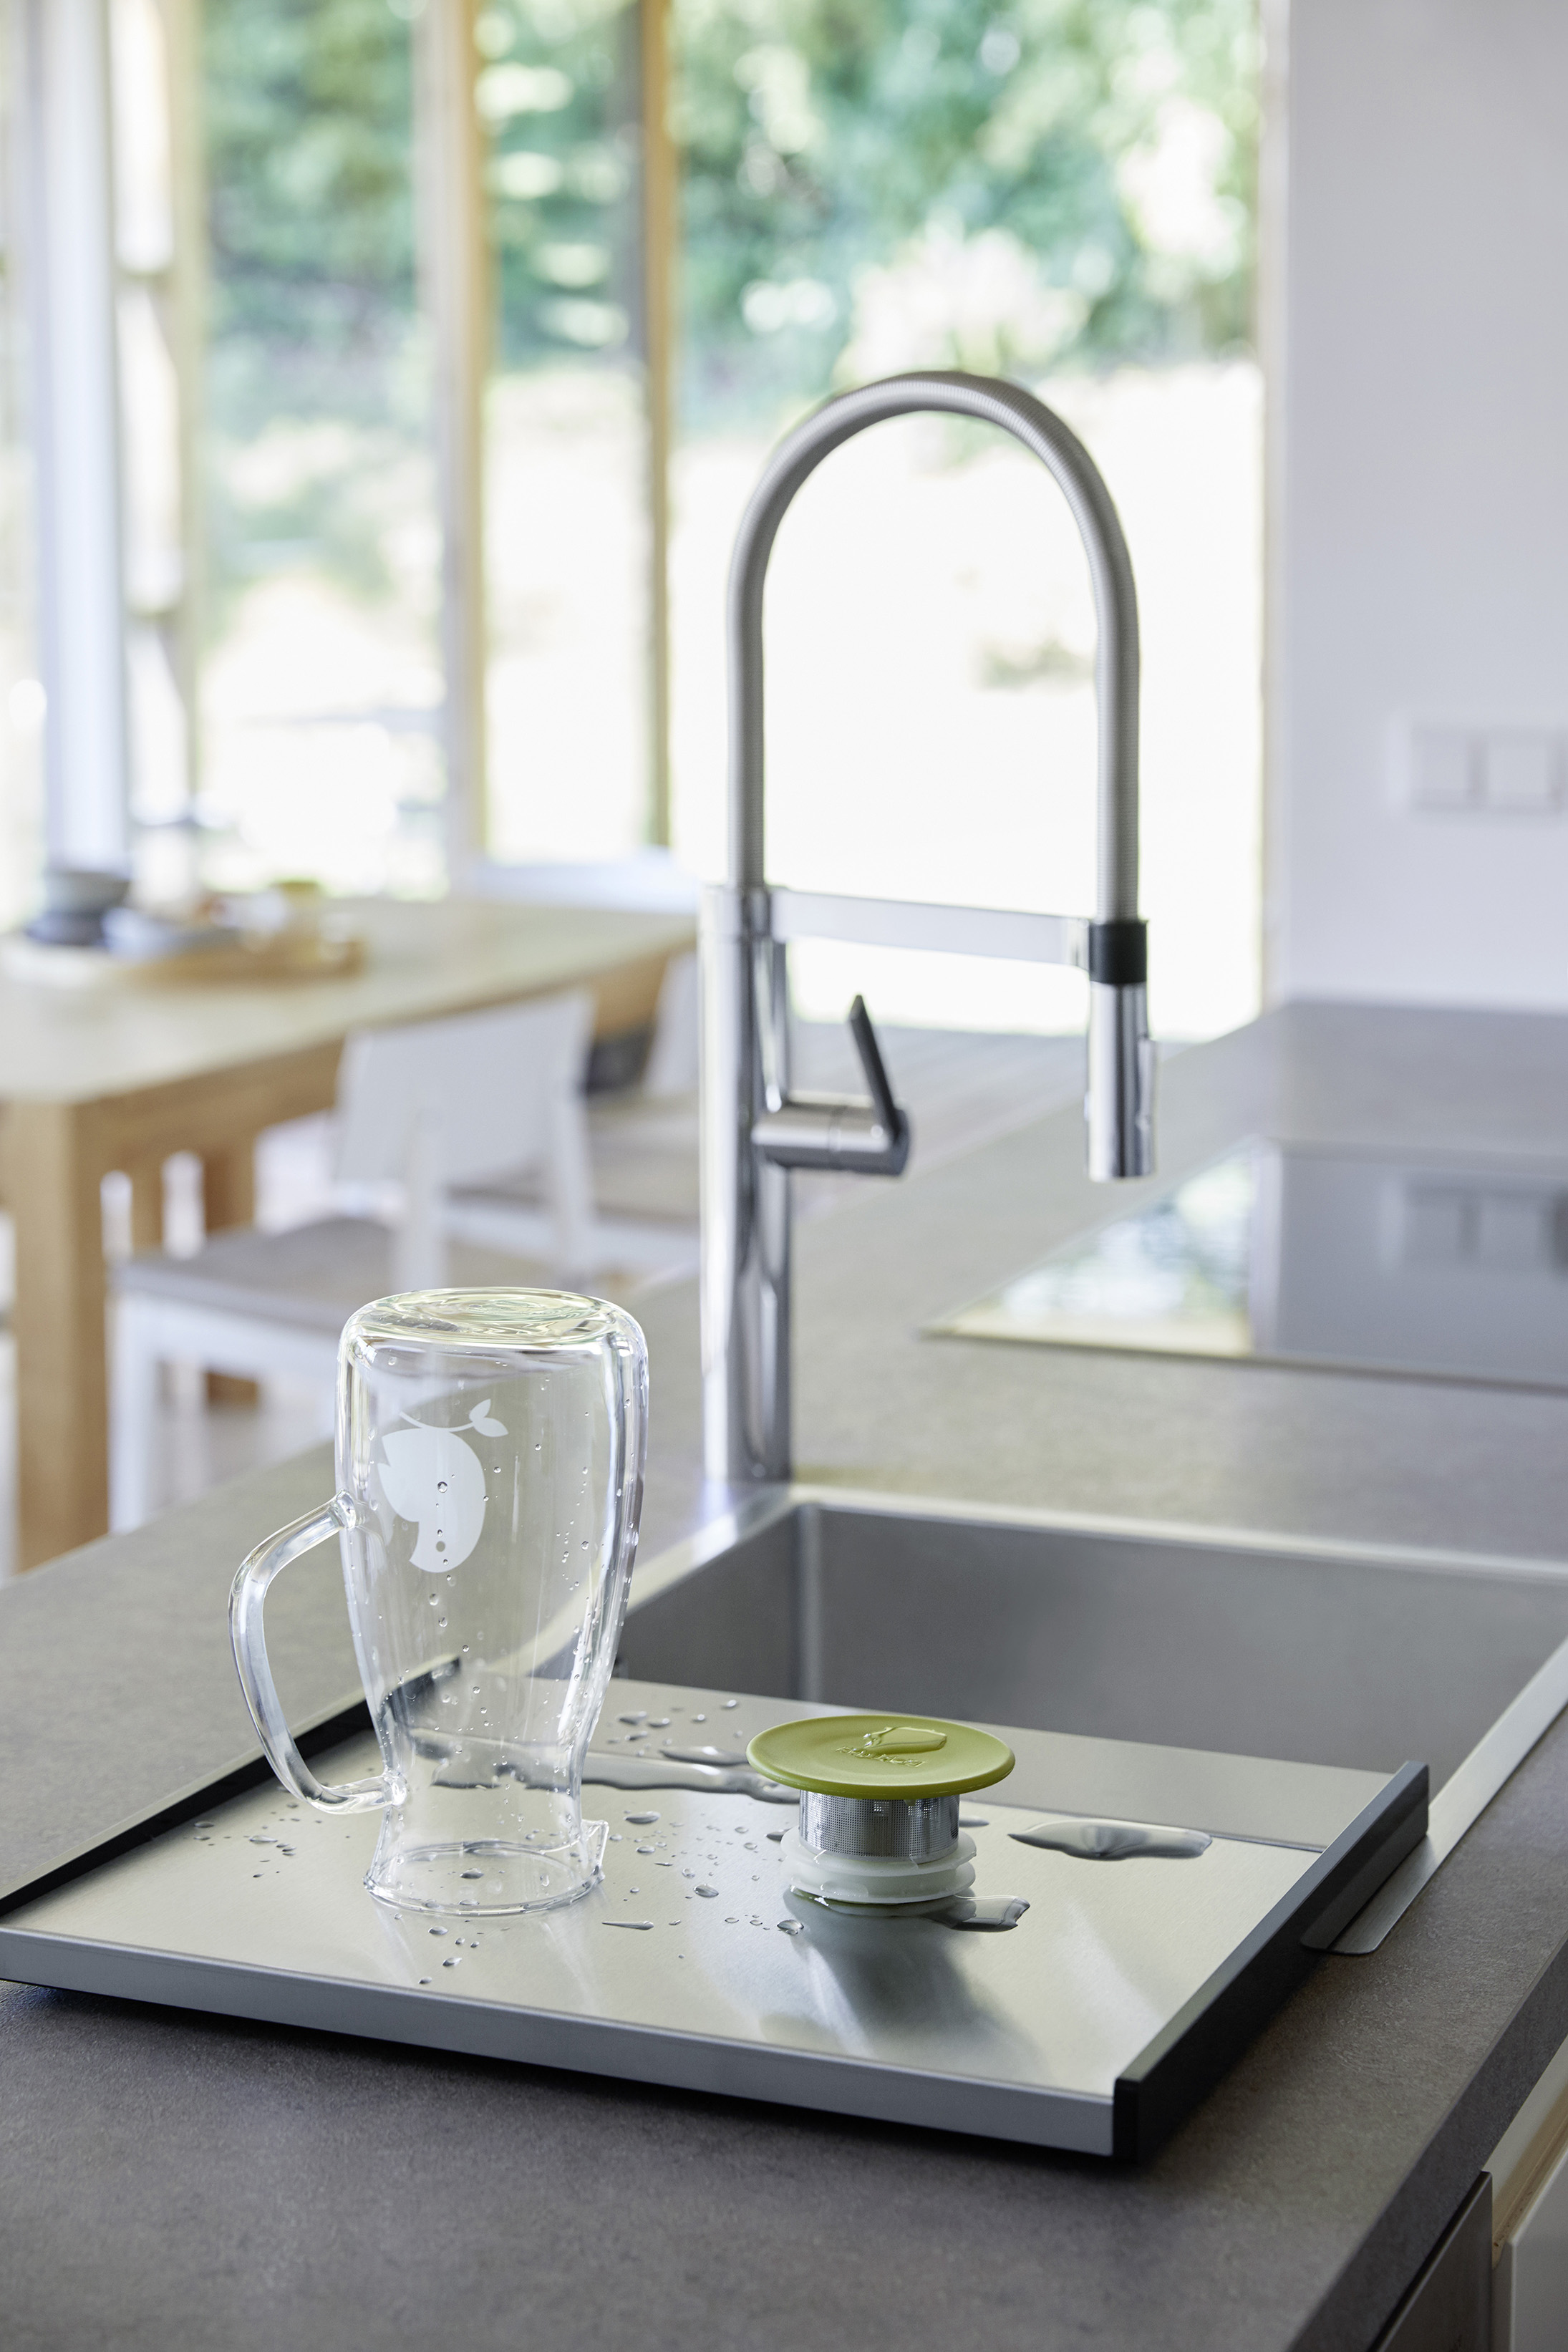 The BLANCO drip tray, specially designed for small kitchens